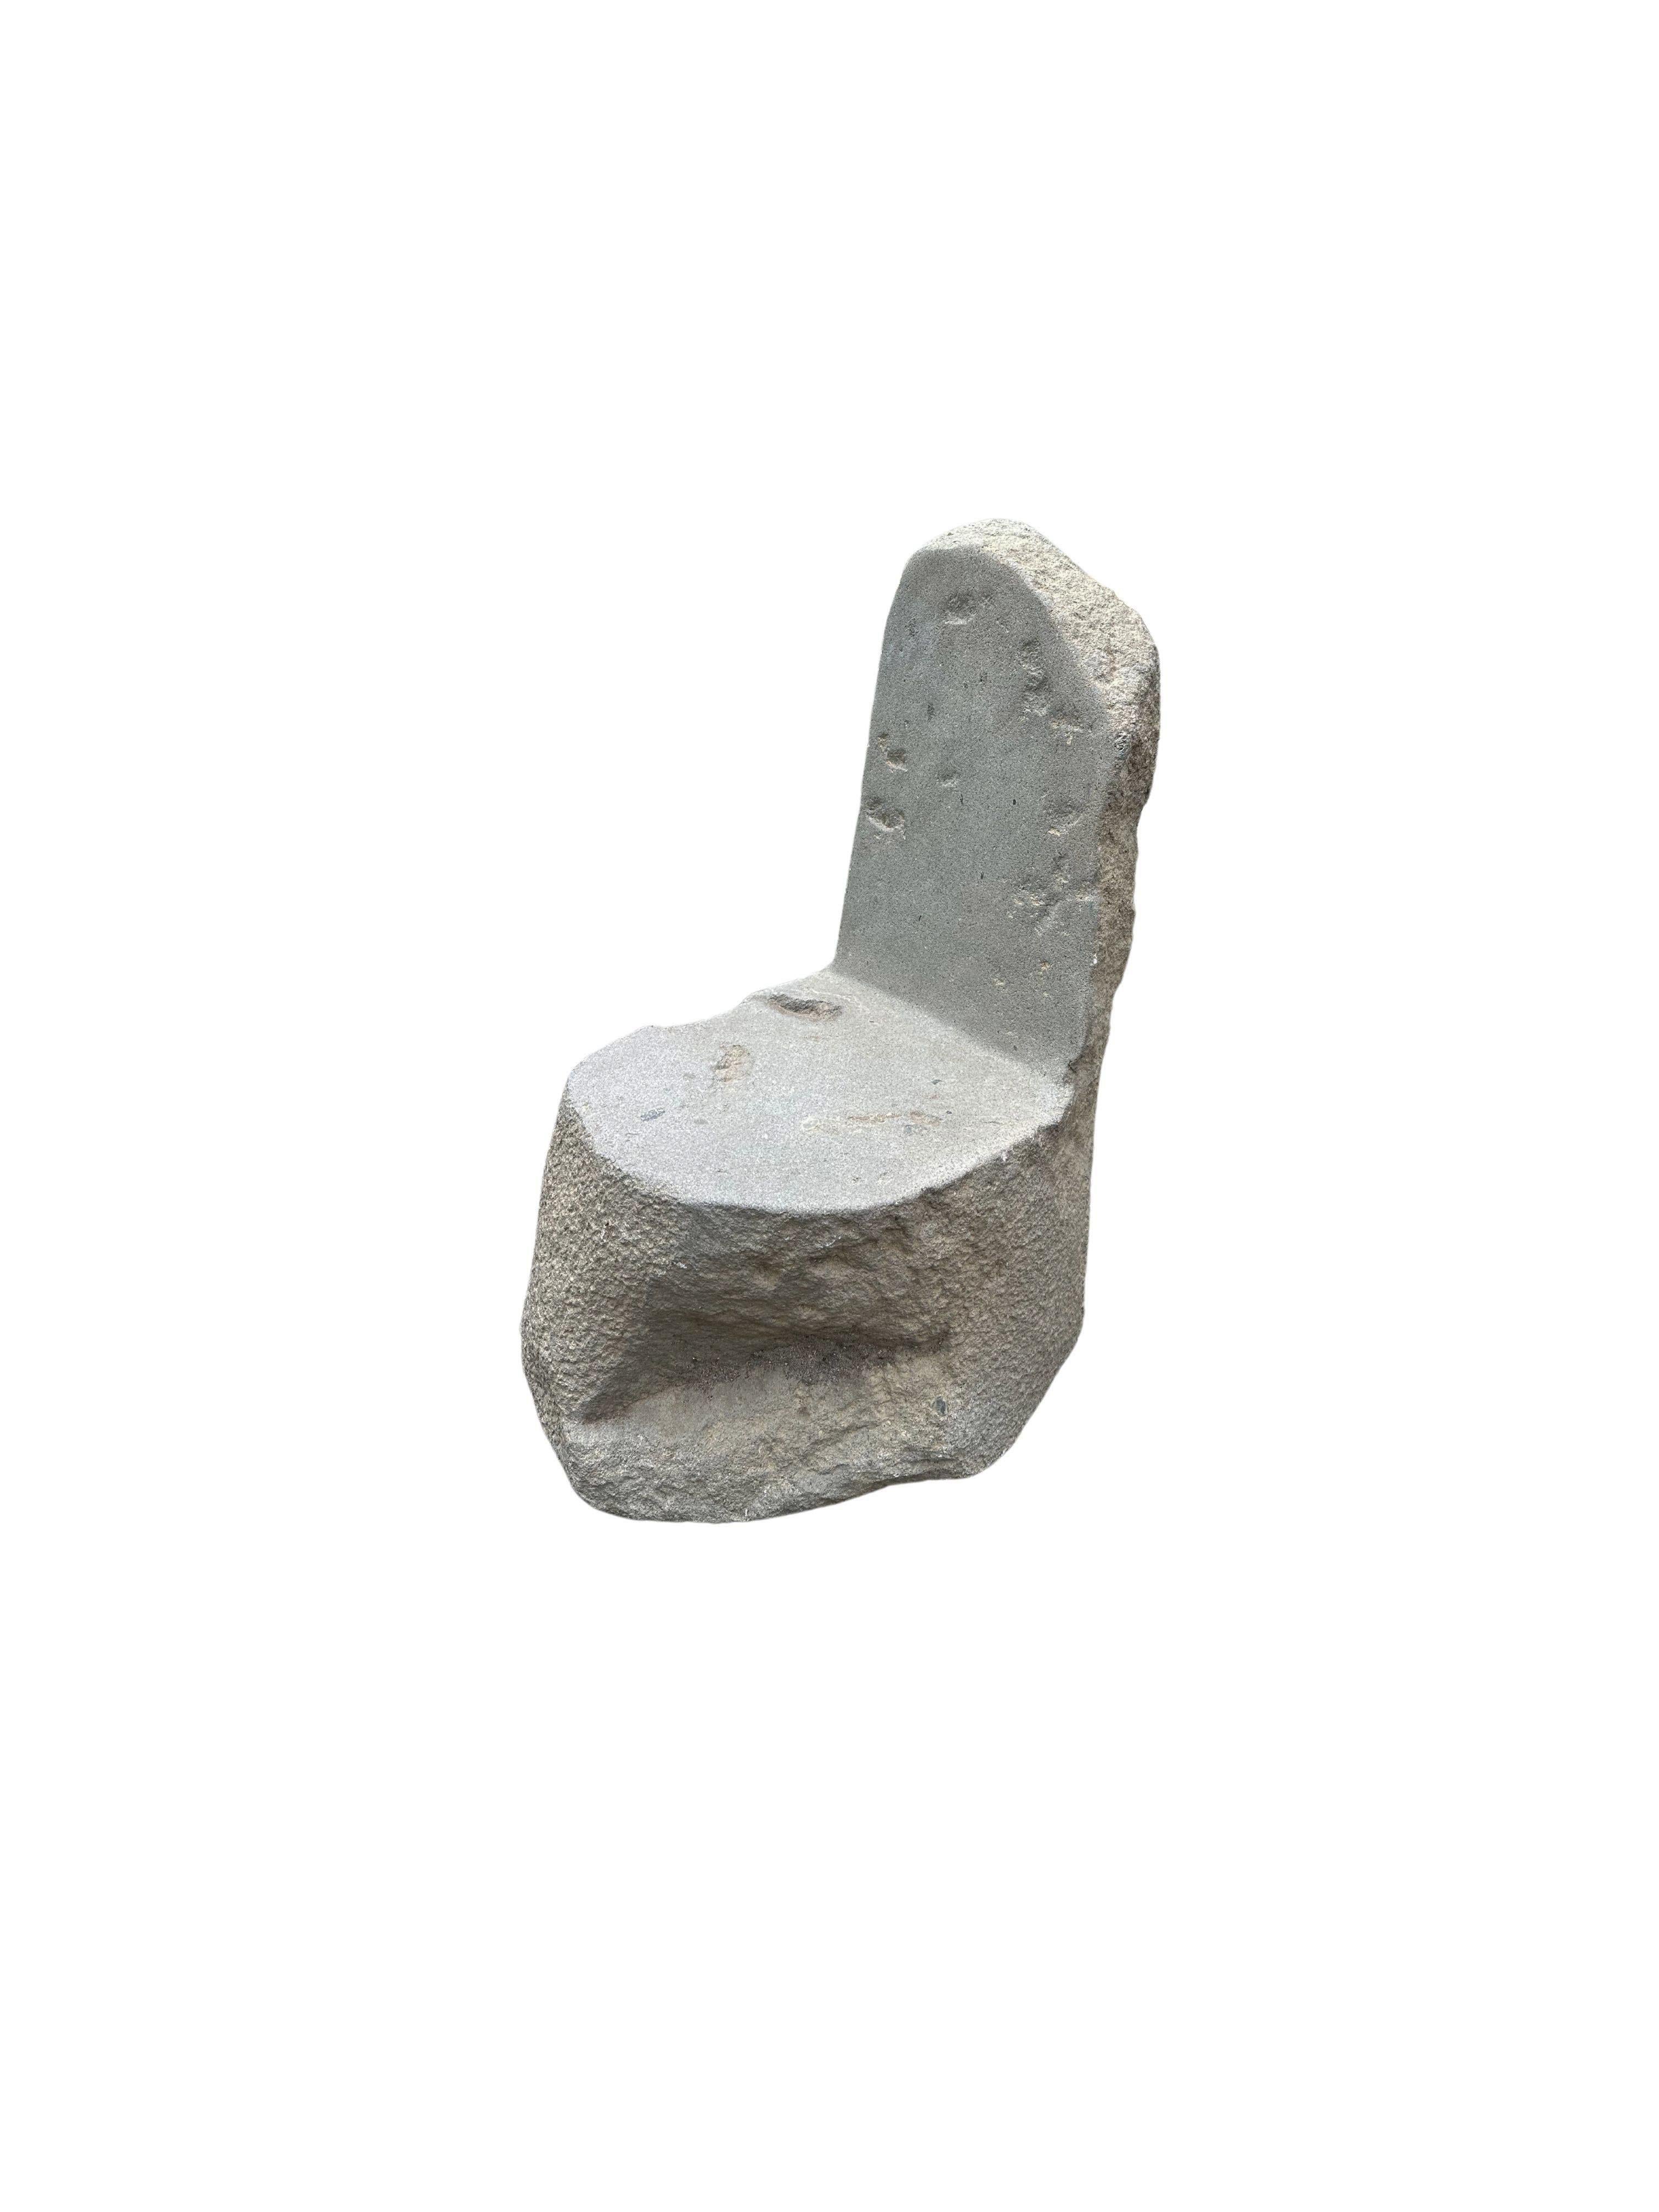 chair made of stone